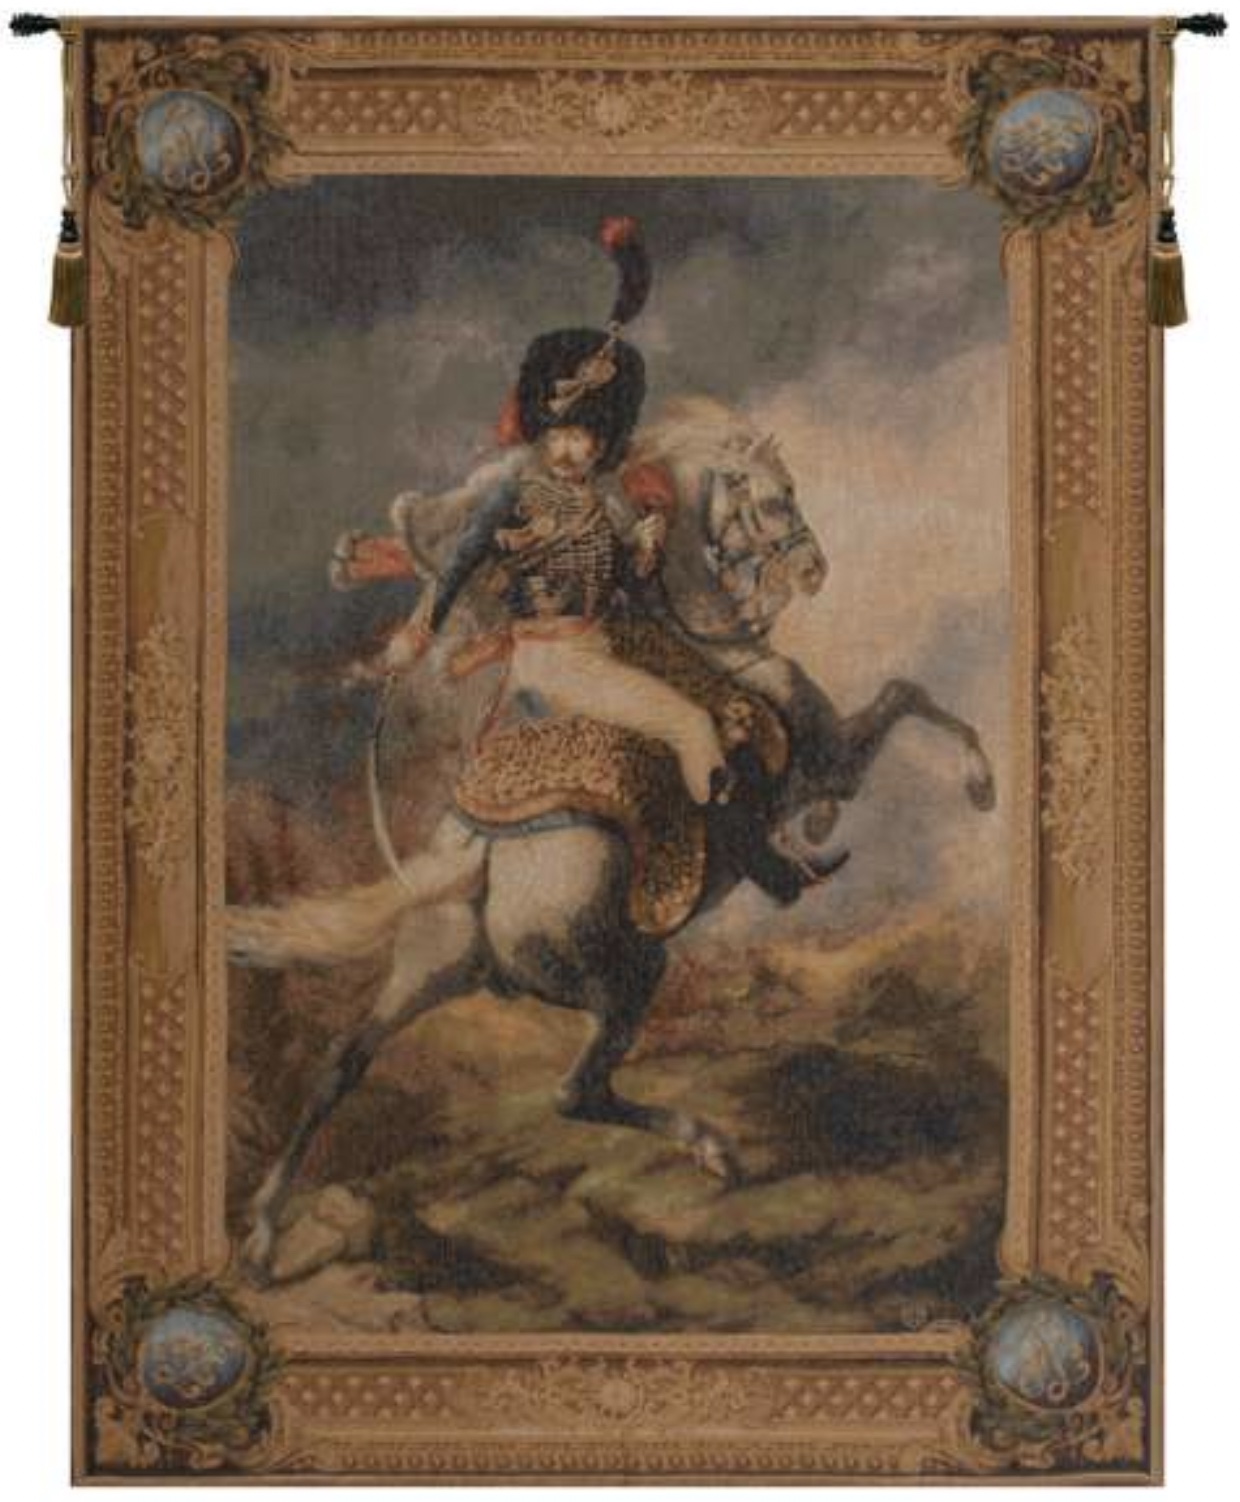 The Charging Chasseur French Wall Tapestry The Charging Chasseur French Wall Tapestry, Cavalier de la Garde Imperiale, of the Imperial Guard